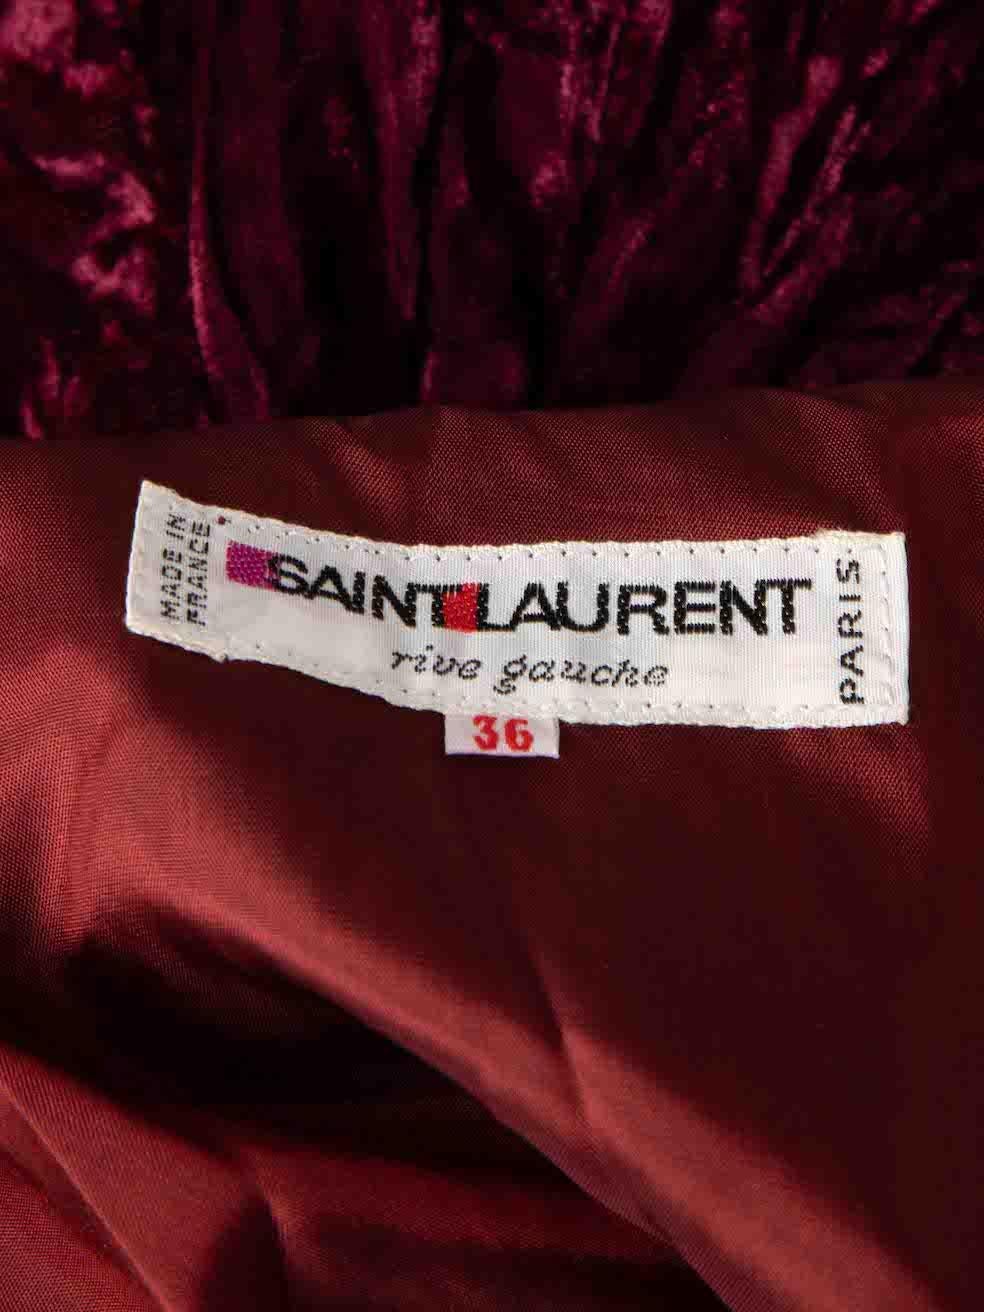 Saint Laurent Vintage Burgundy Crushed Velvet Maxi Skirt Size S In Excellent Condition For Sale In London, GB